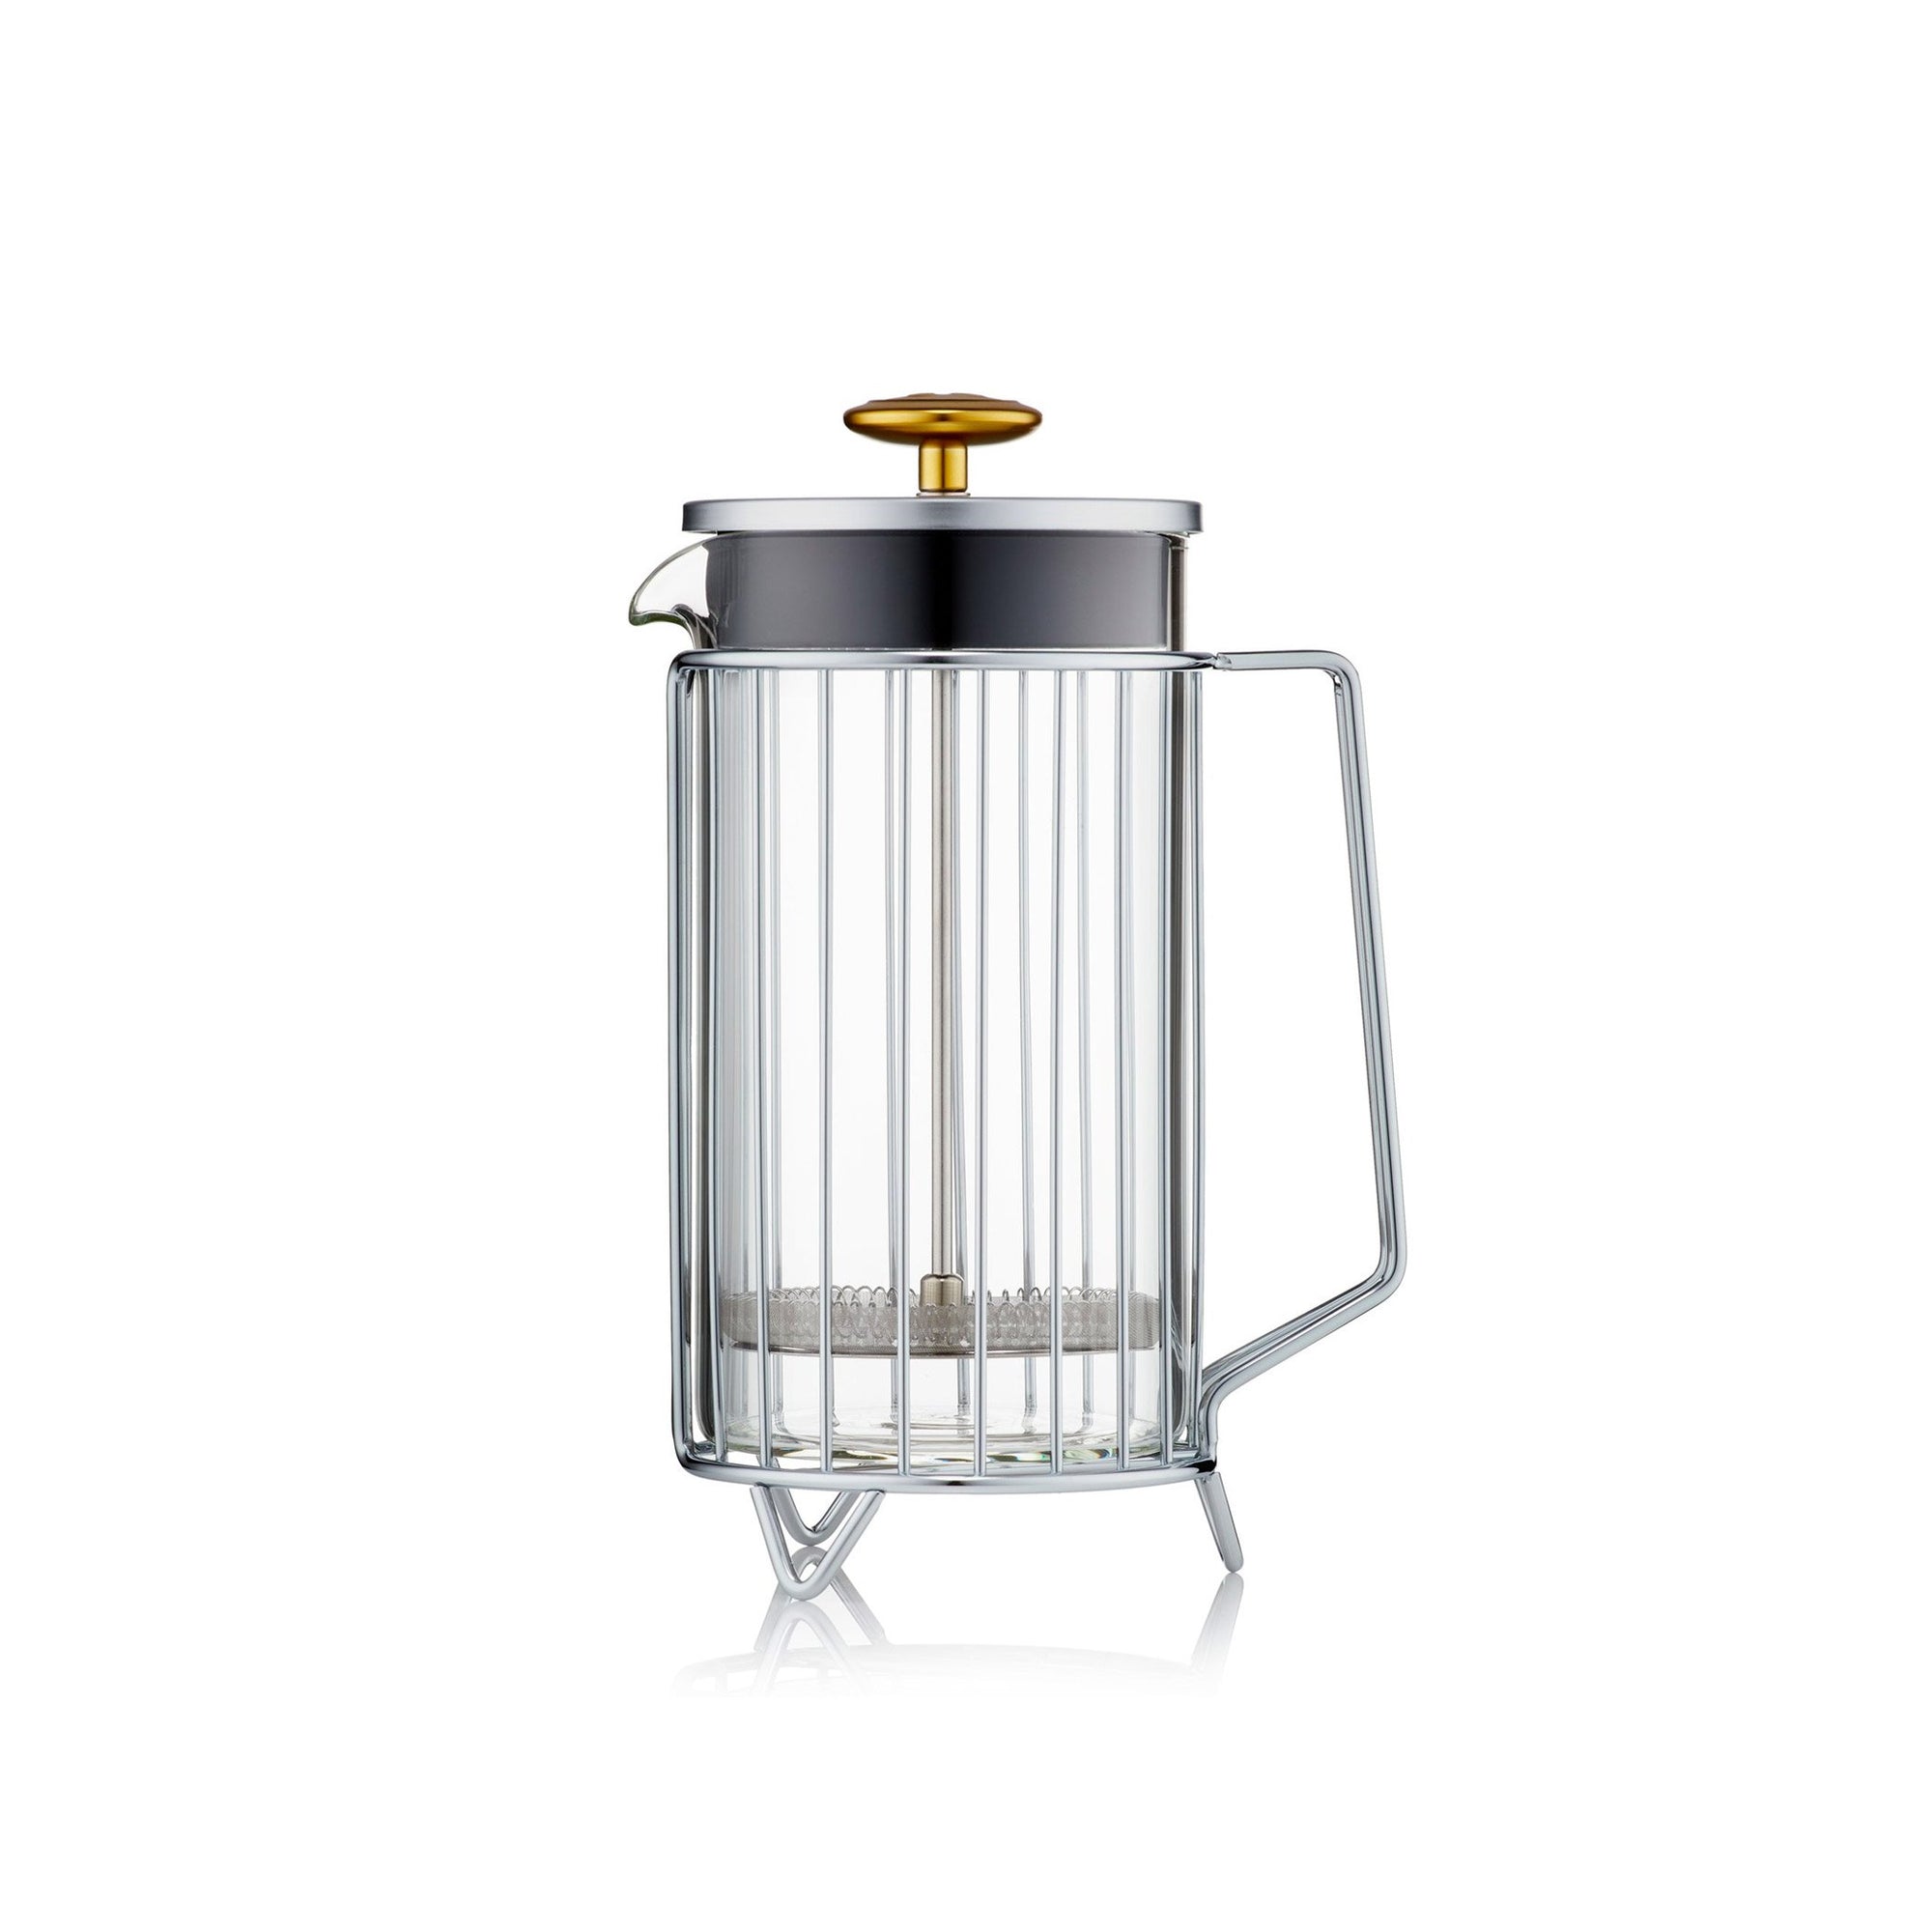 Barista & Co Barista & Co French Press Cafetiere Core Coffee Maker - Copper  (8 Cup / 3 Mug / 1000ML) buy to Japan. CosmoStore Japan